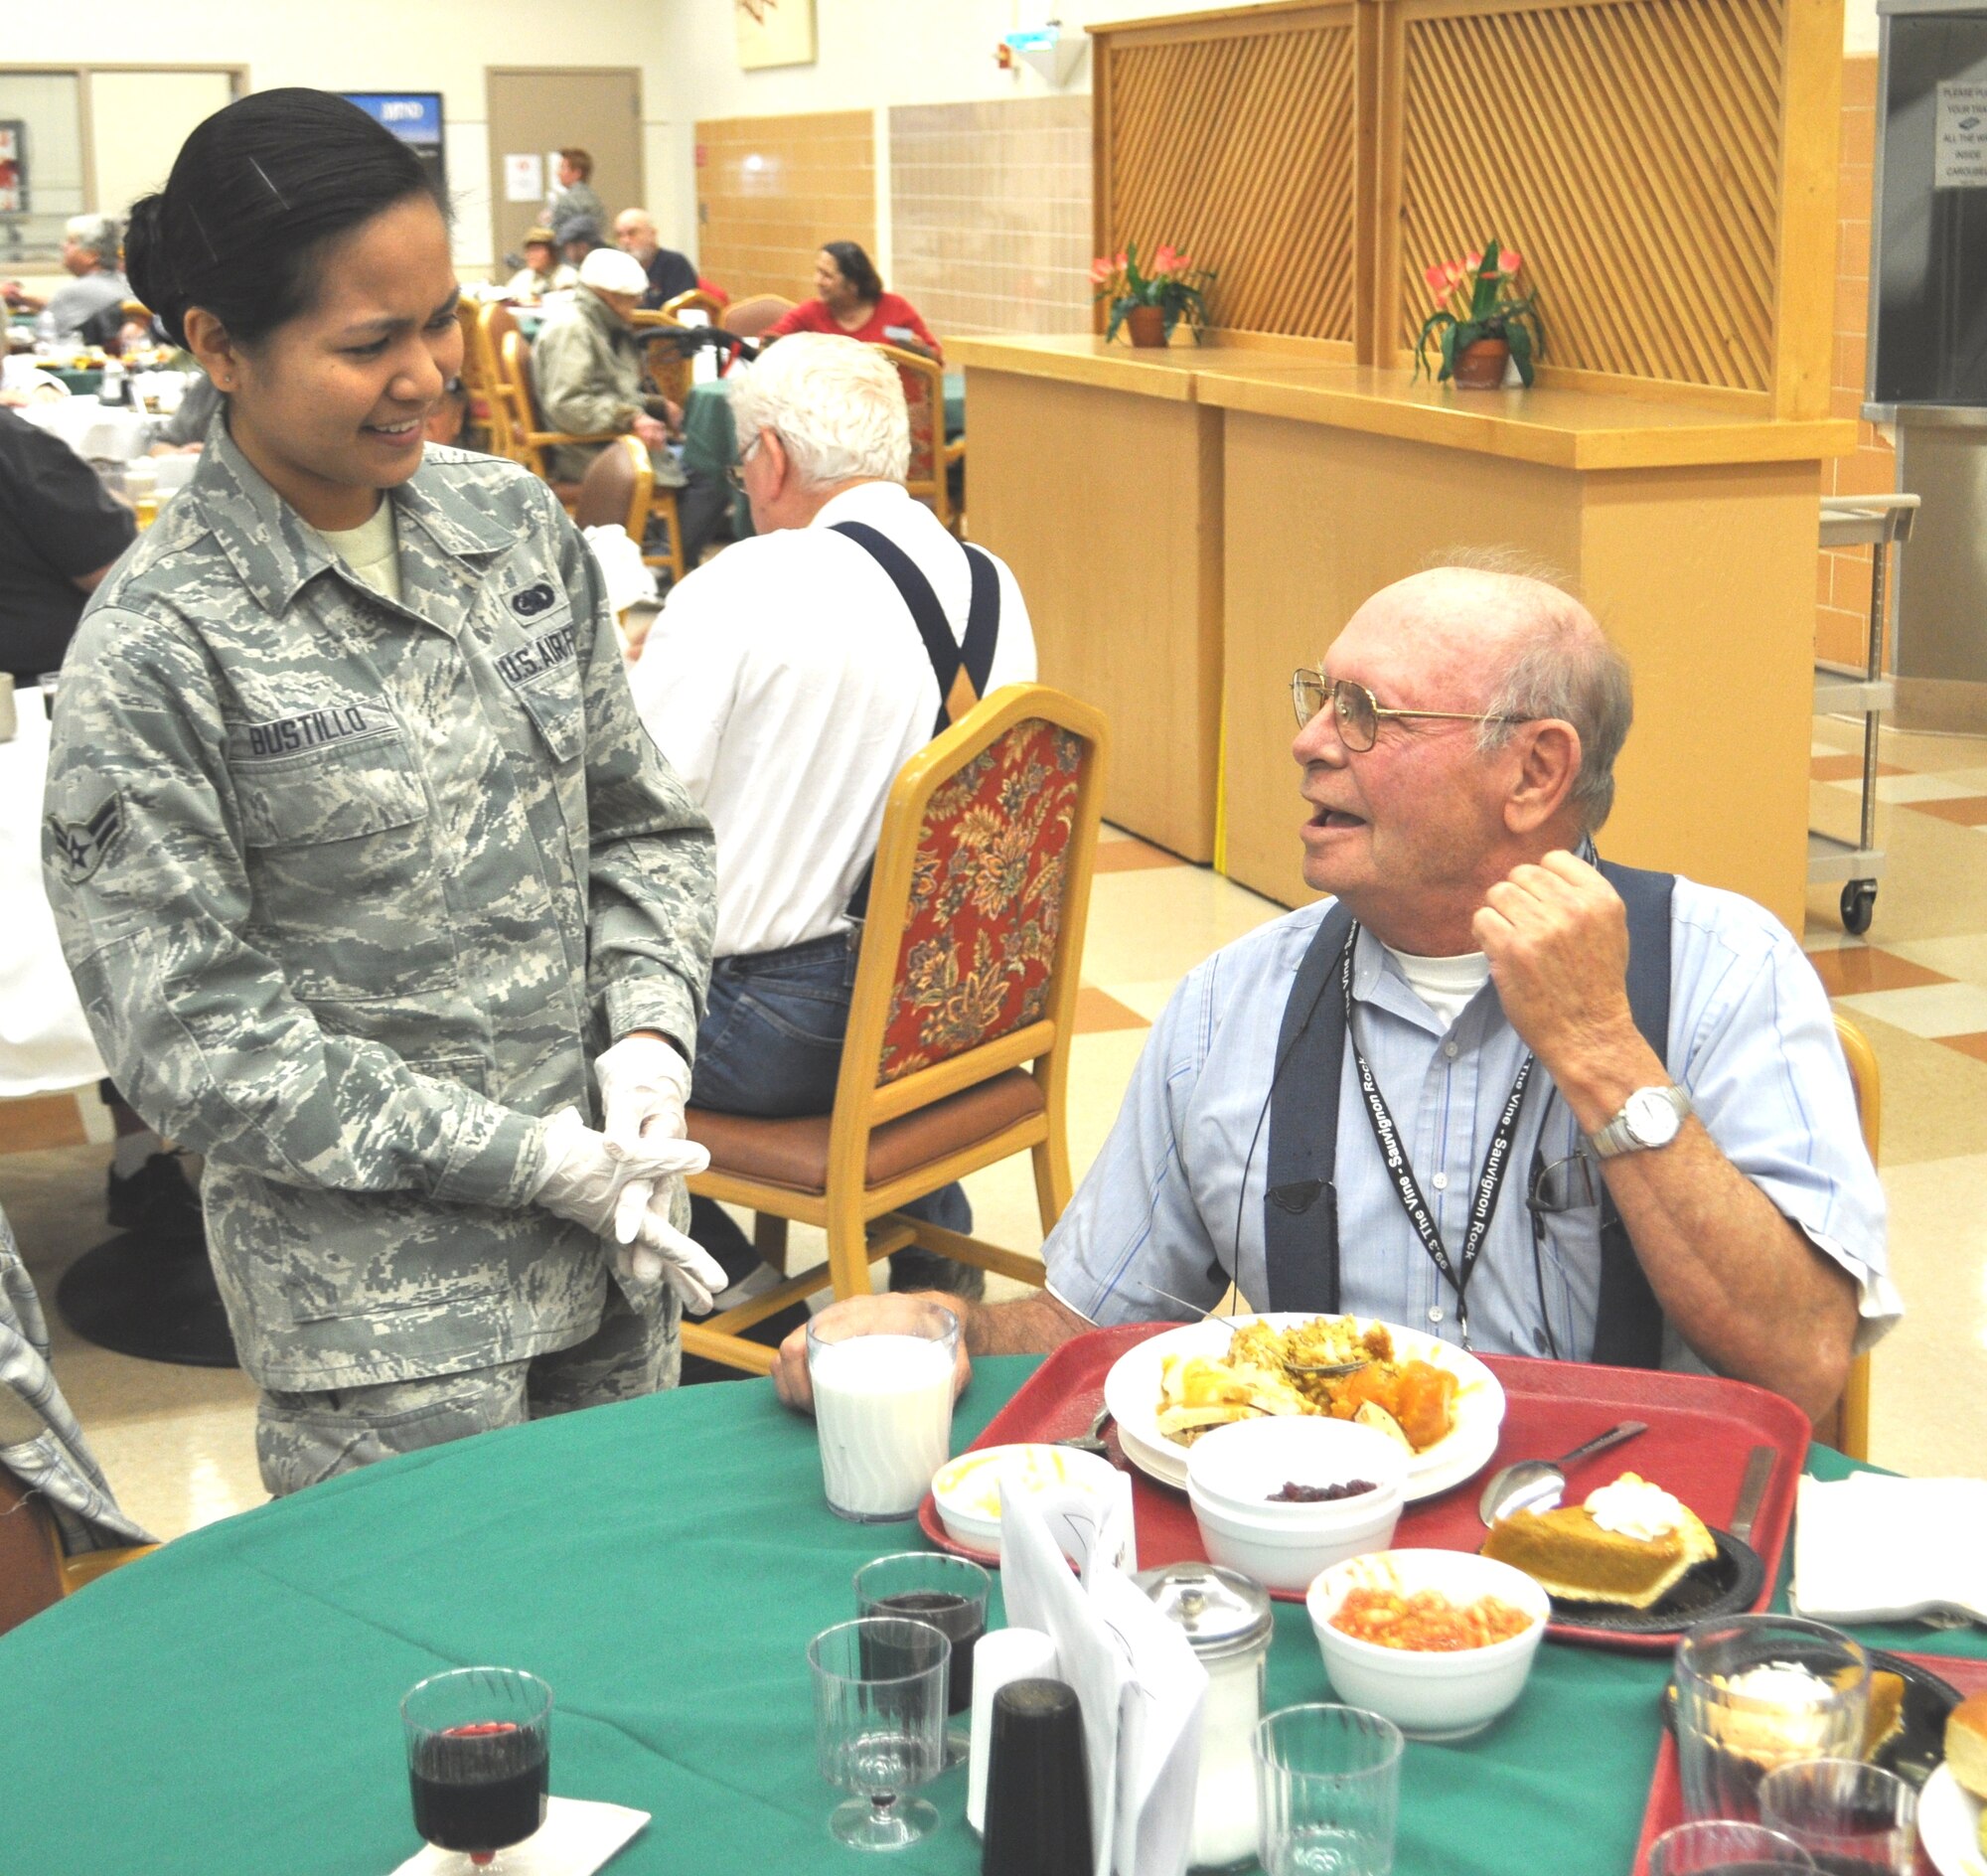 Airman 1st Class Dianne Bustillo, 60th LRS, chats with a veteran over Thanksgiving dinner at the California Veterans Home, Yountville. (U.S. Air Foce photo/Ellen Hatfield)